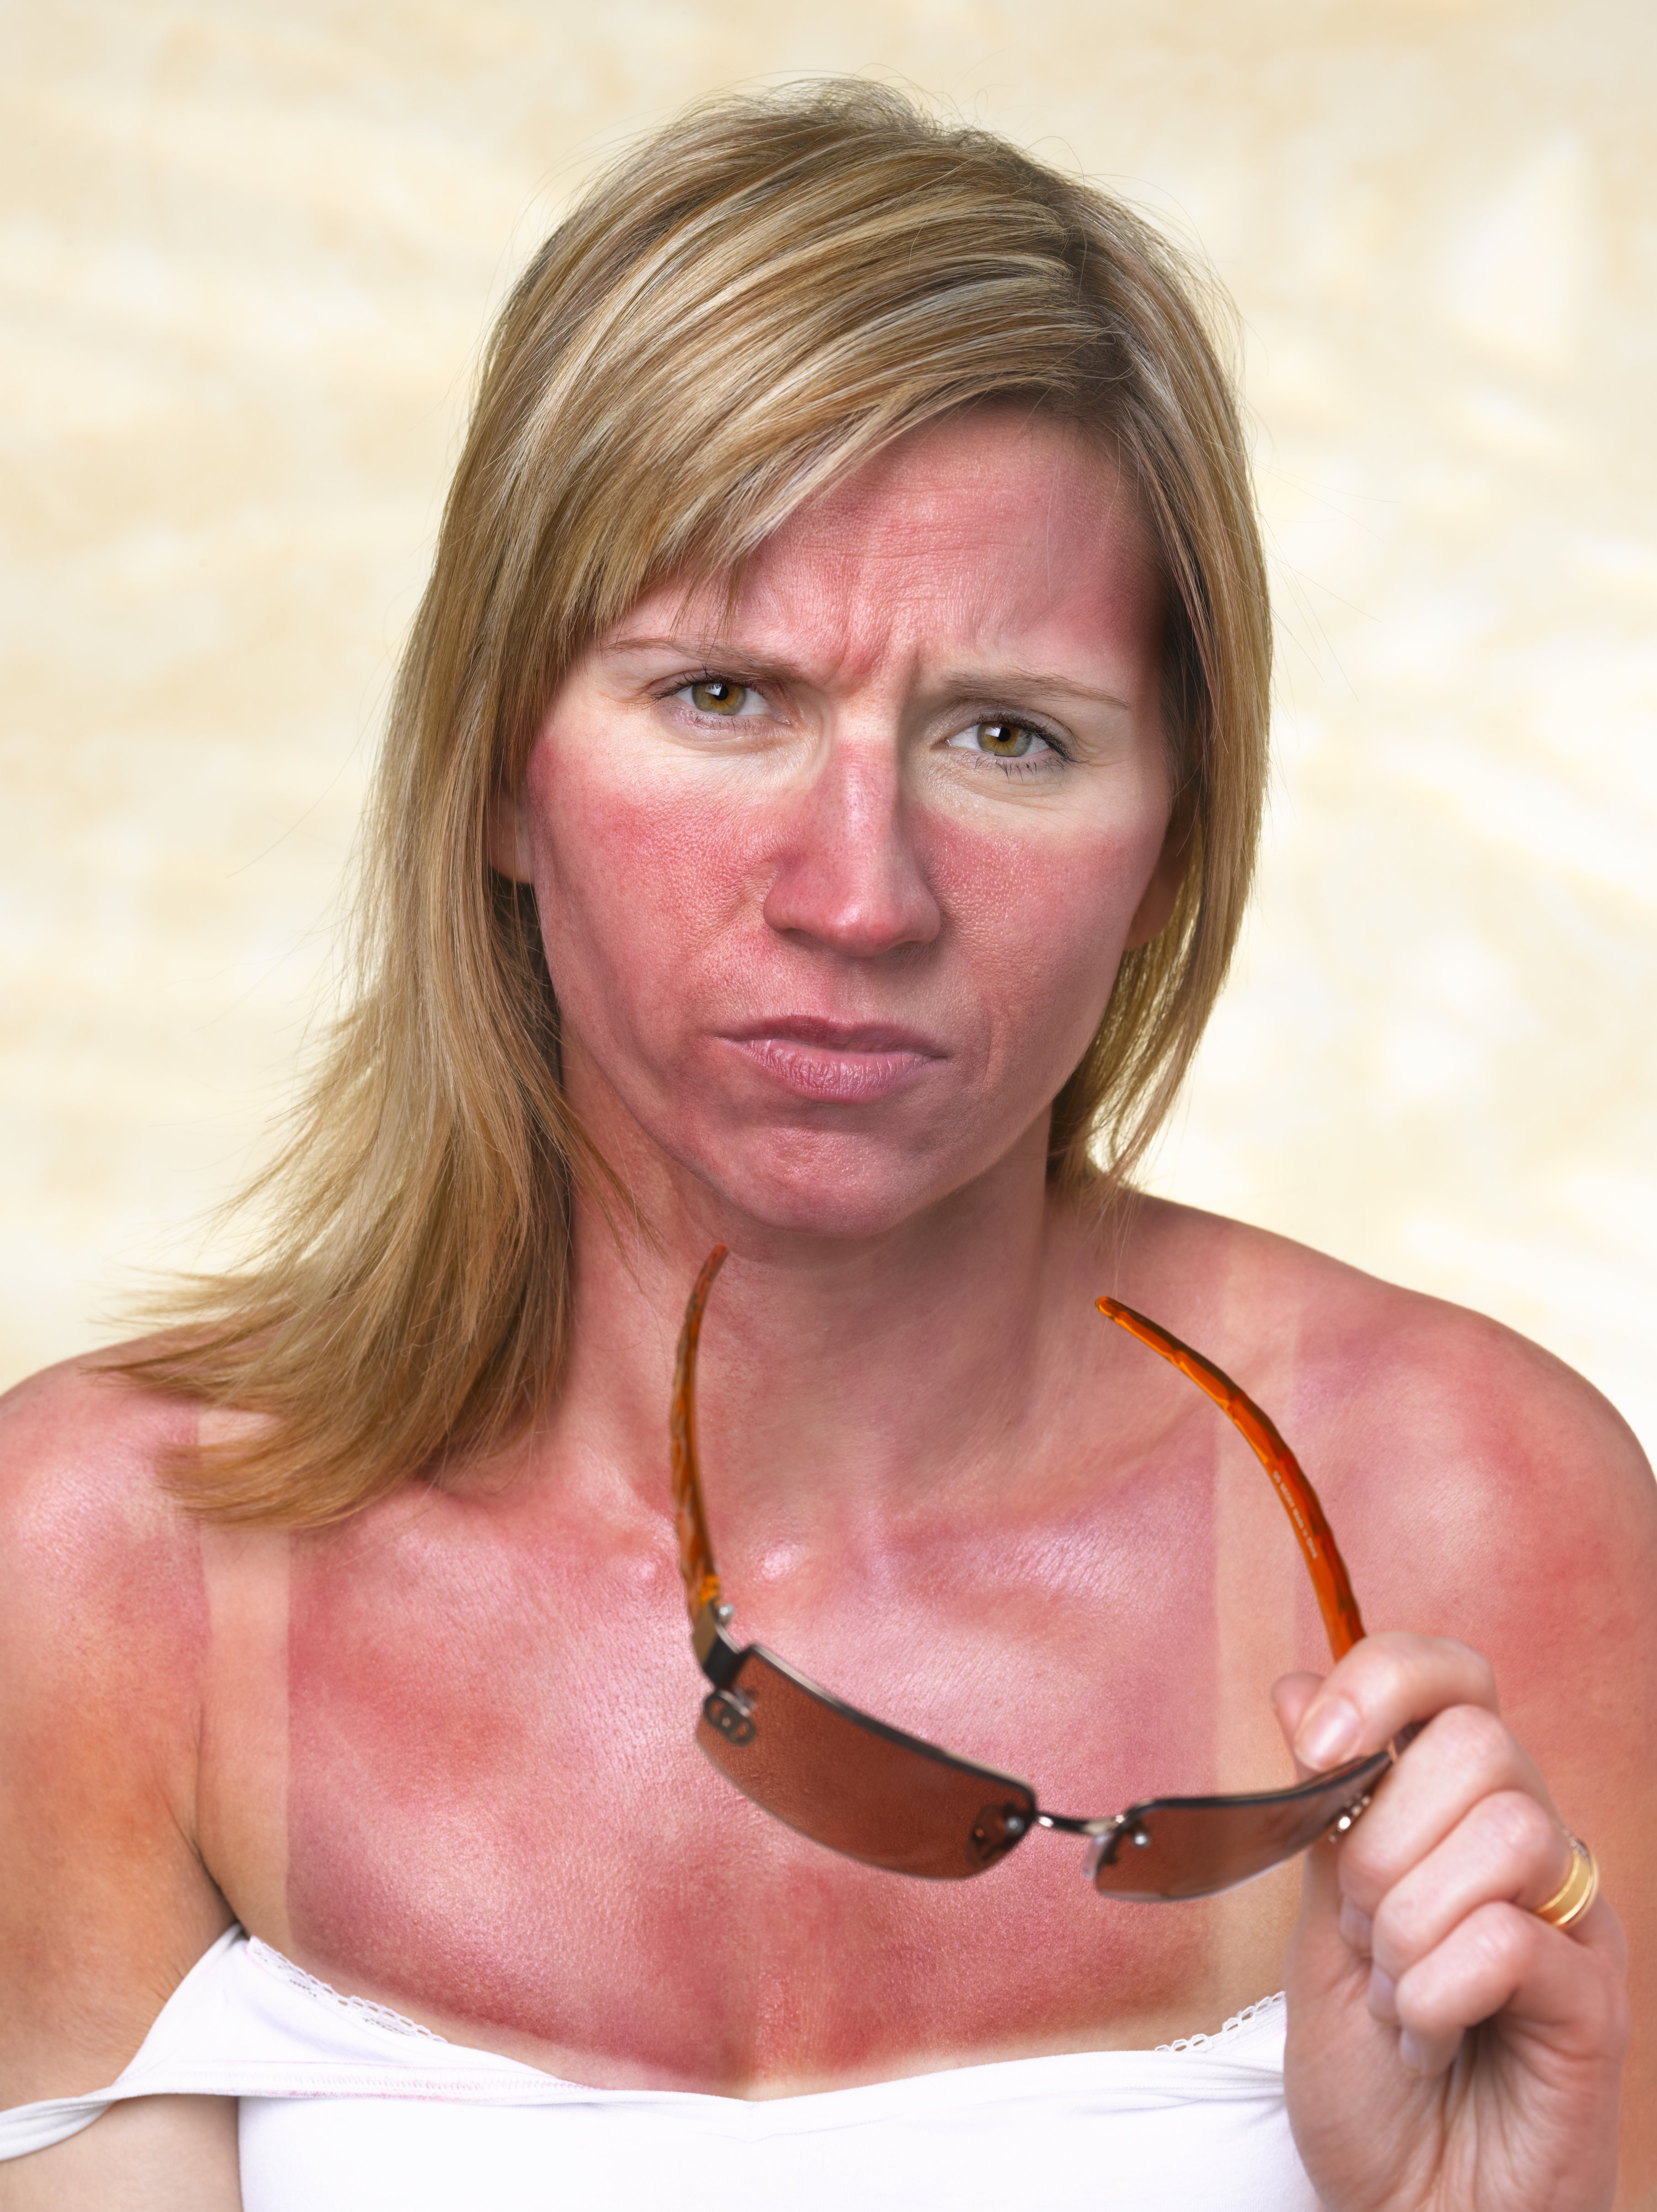 A woman with a sunburn. | Source: Getty Images